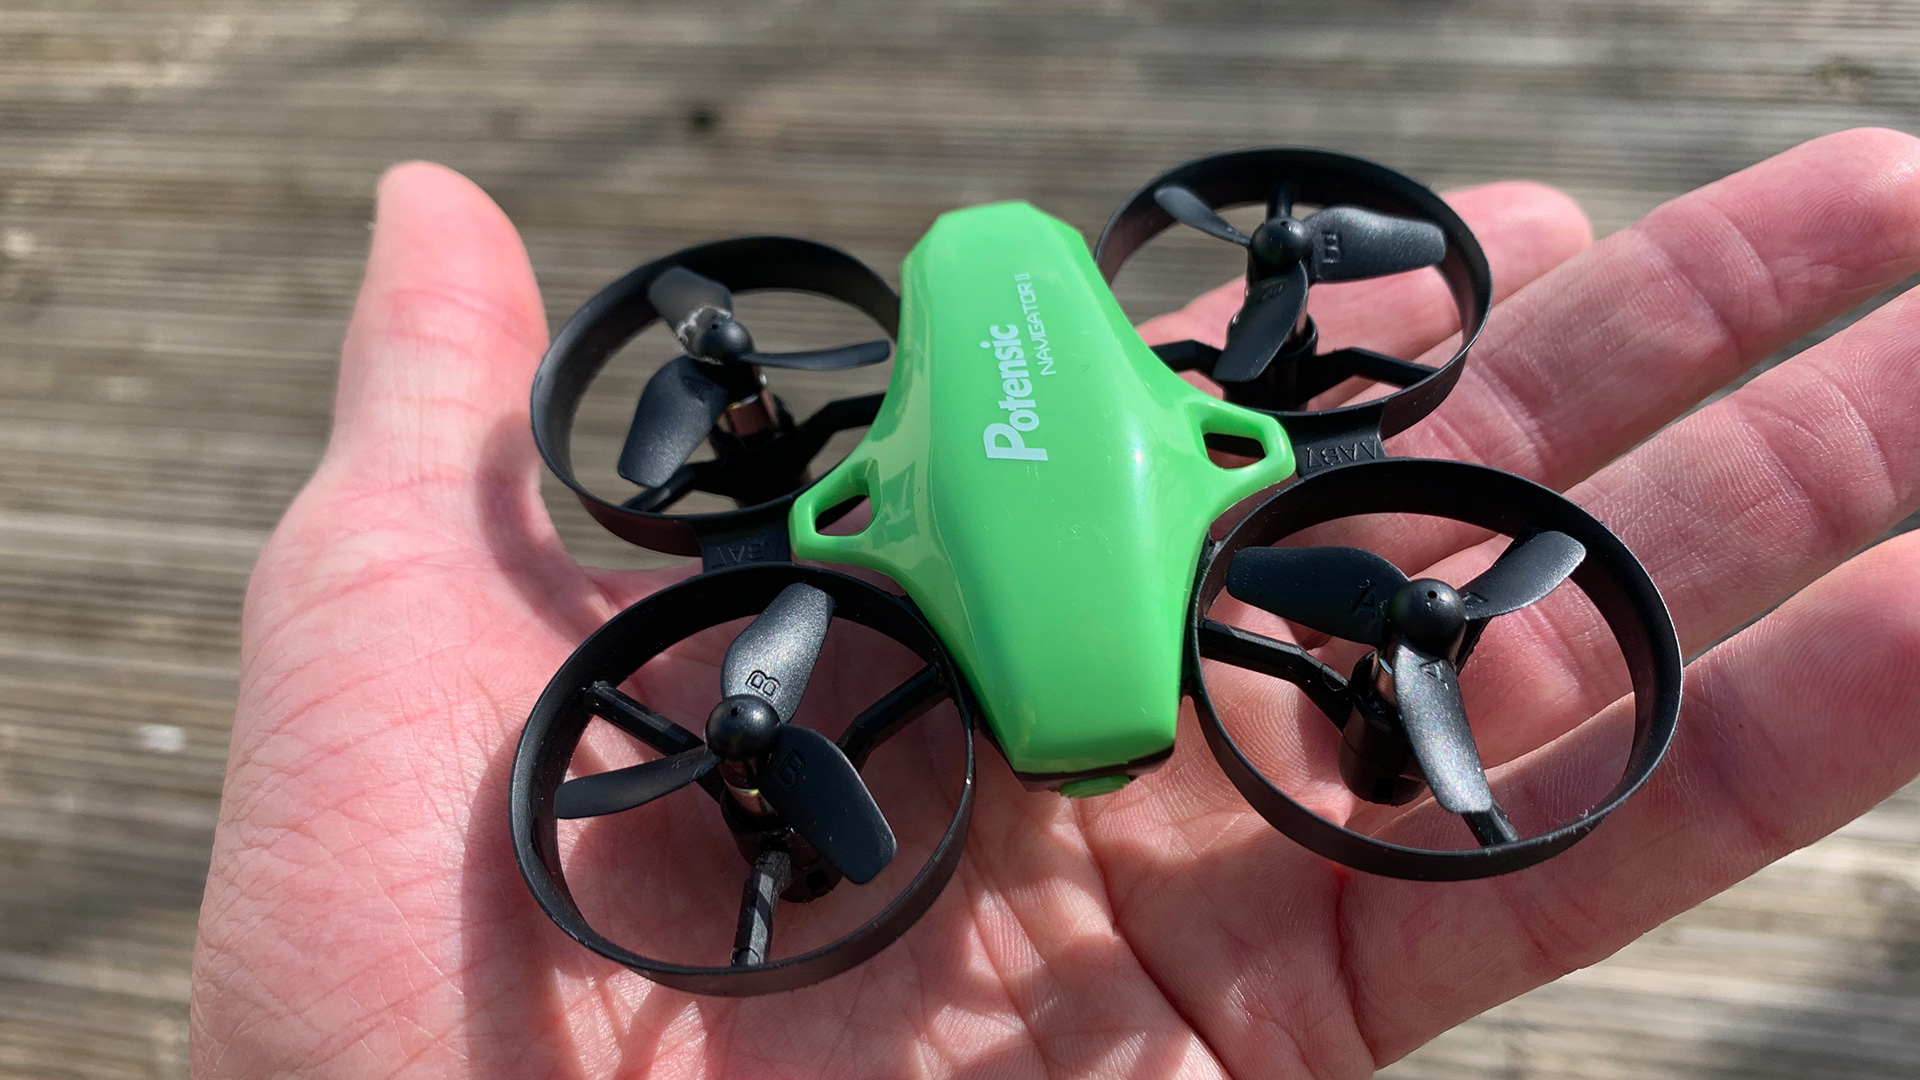 How to buy a toy drone: what to look for and what to avoid